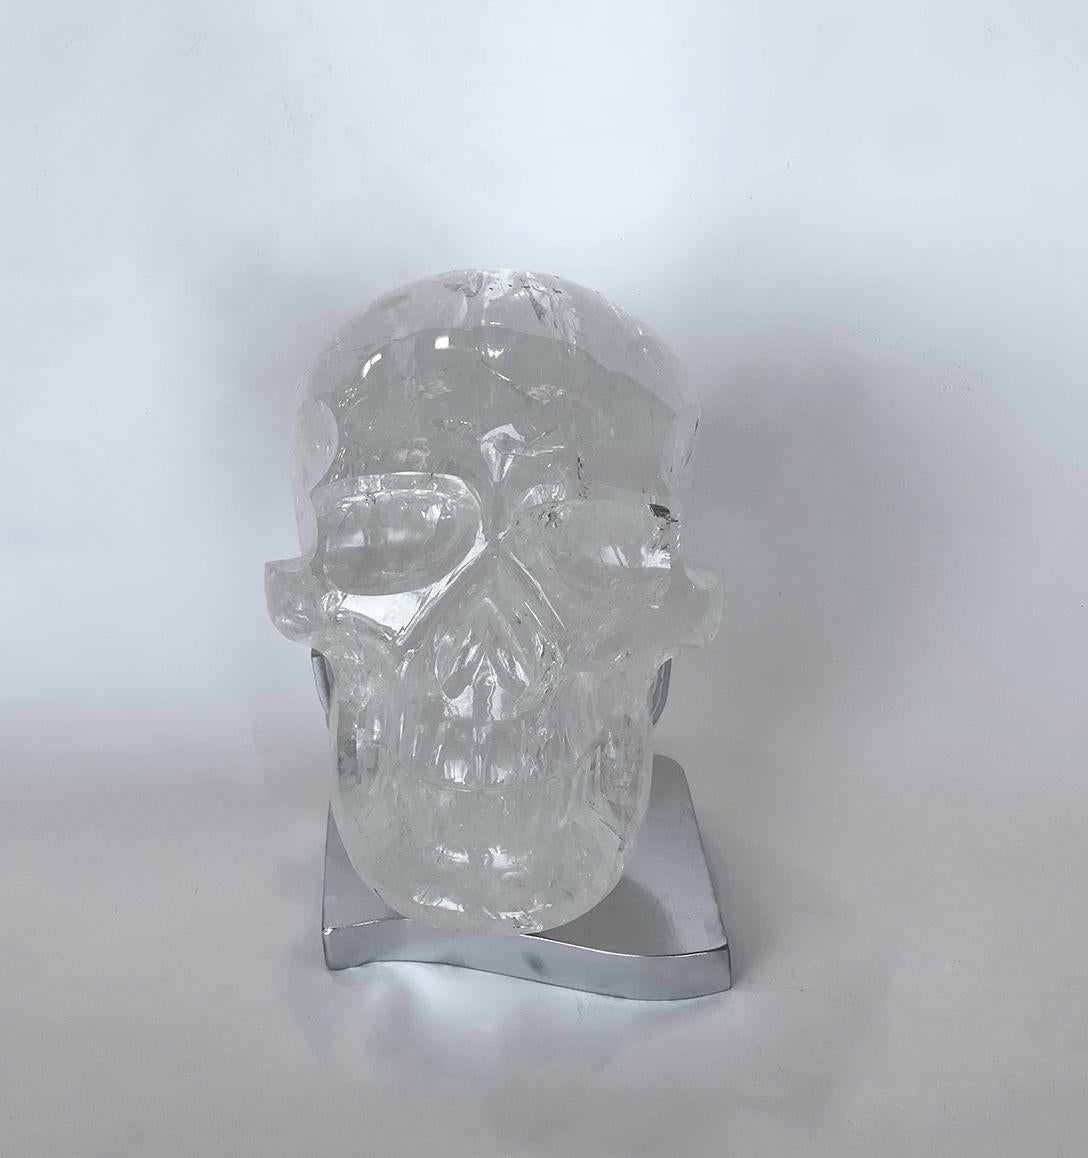 Sublime rock crystal skull with stainless steel stand. Made in Brazil.
 
Dimensions: 
 
With stand:8 ½